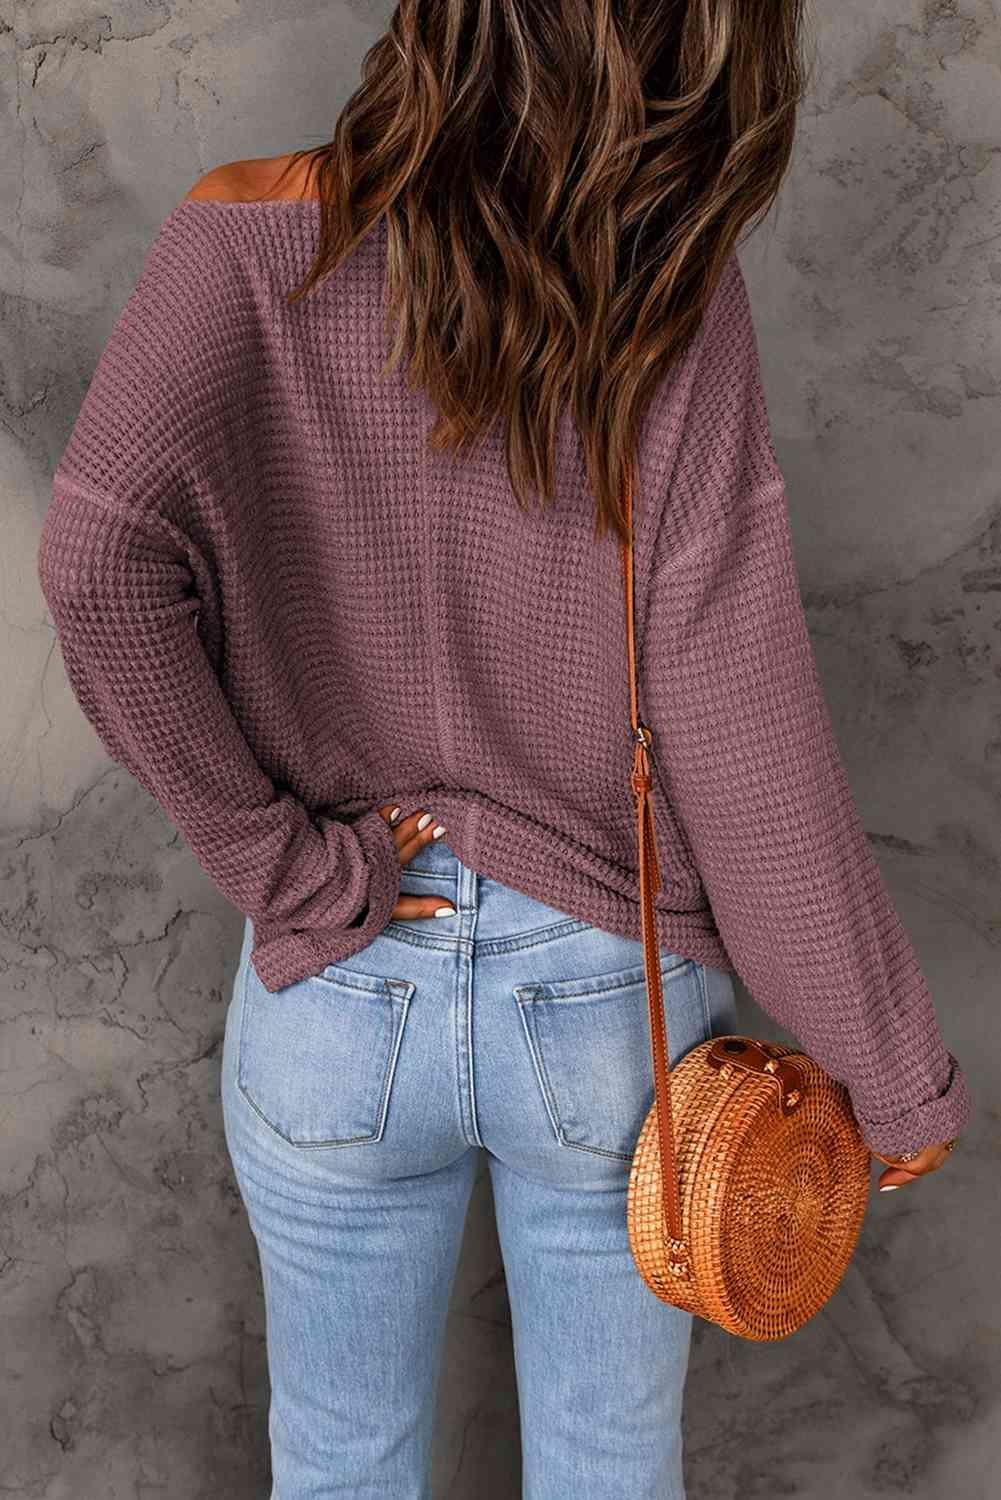 a woman wearing a purple sweater and jeans